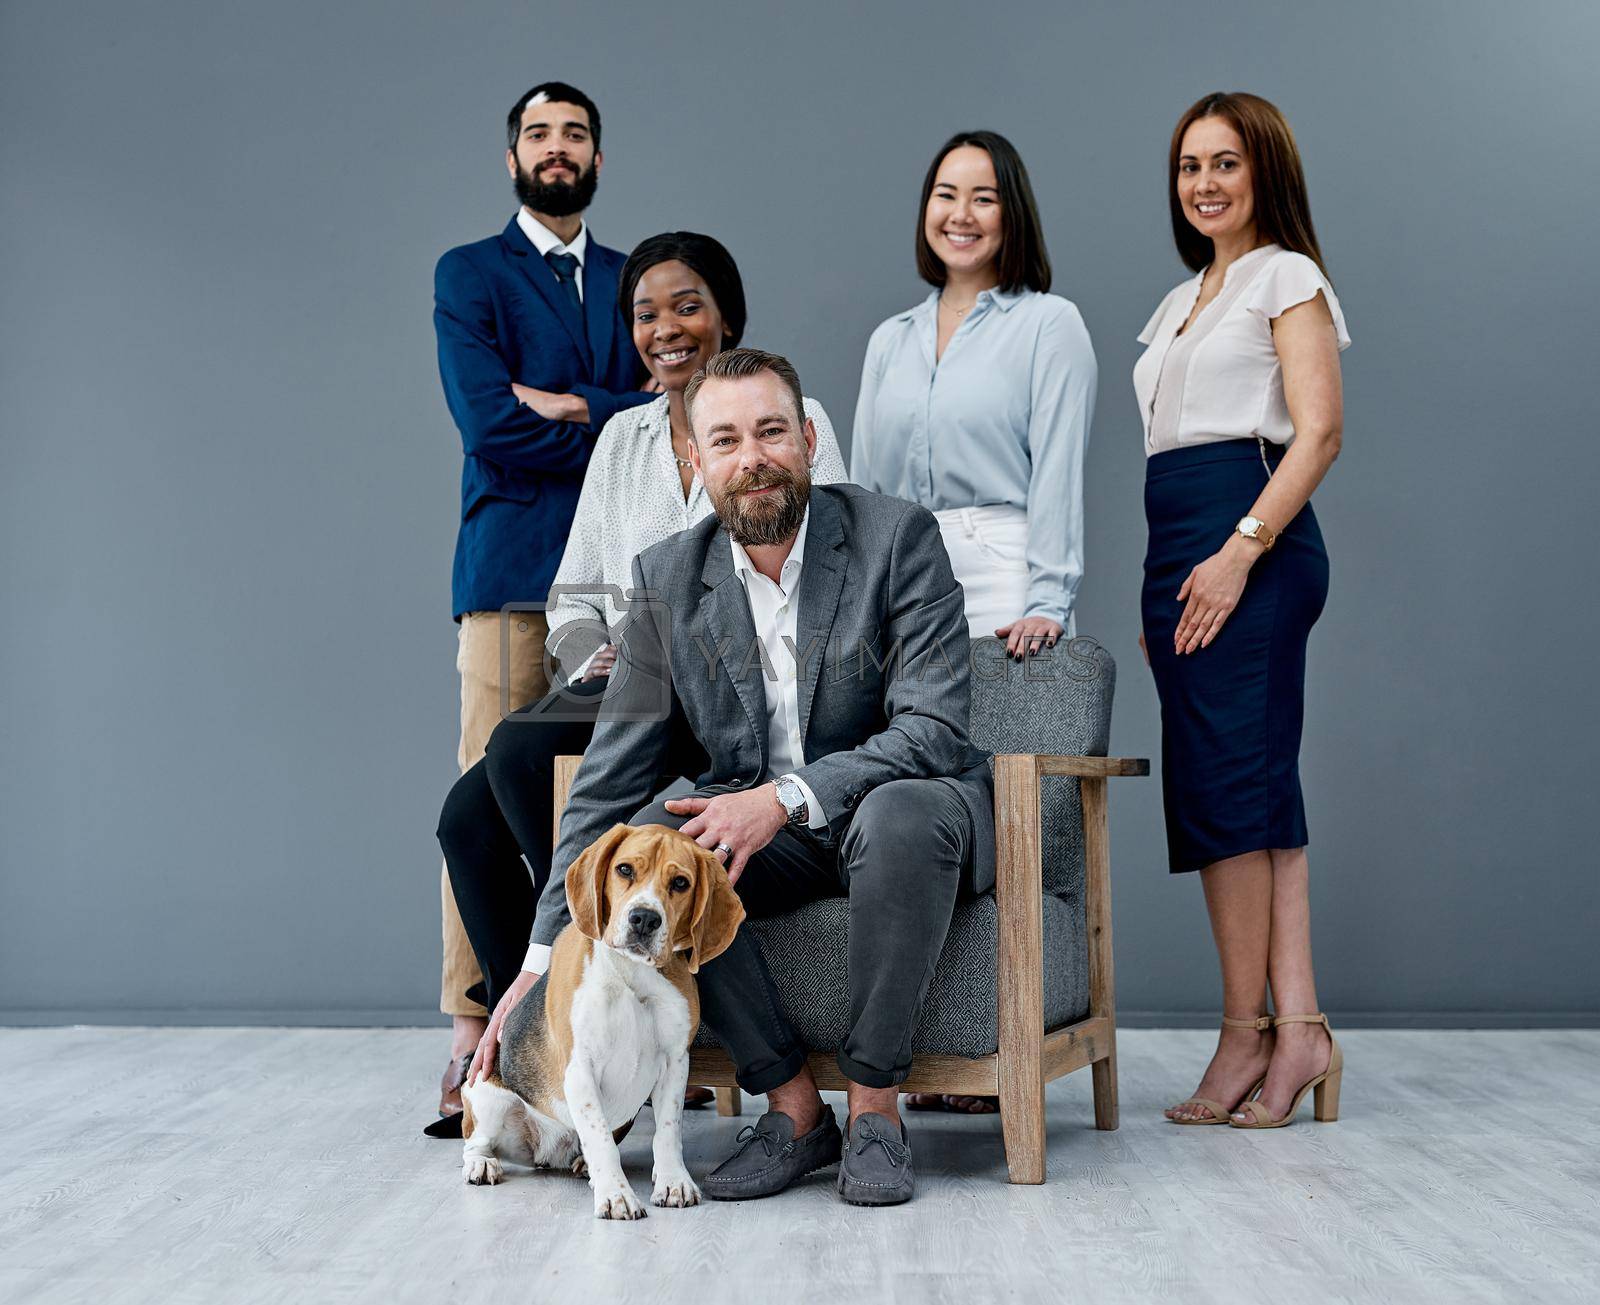 Portrait of a group of businesspeople posing together with a dog against a grey background.